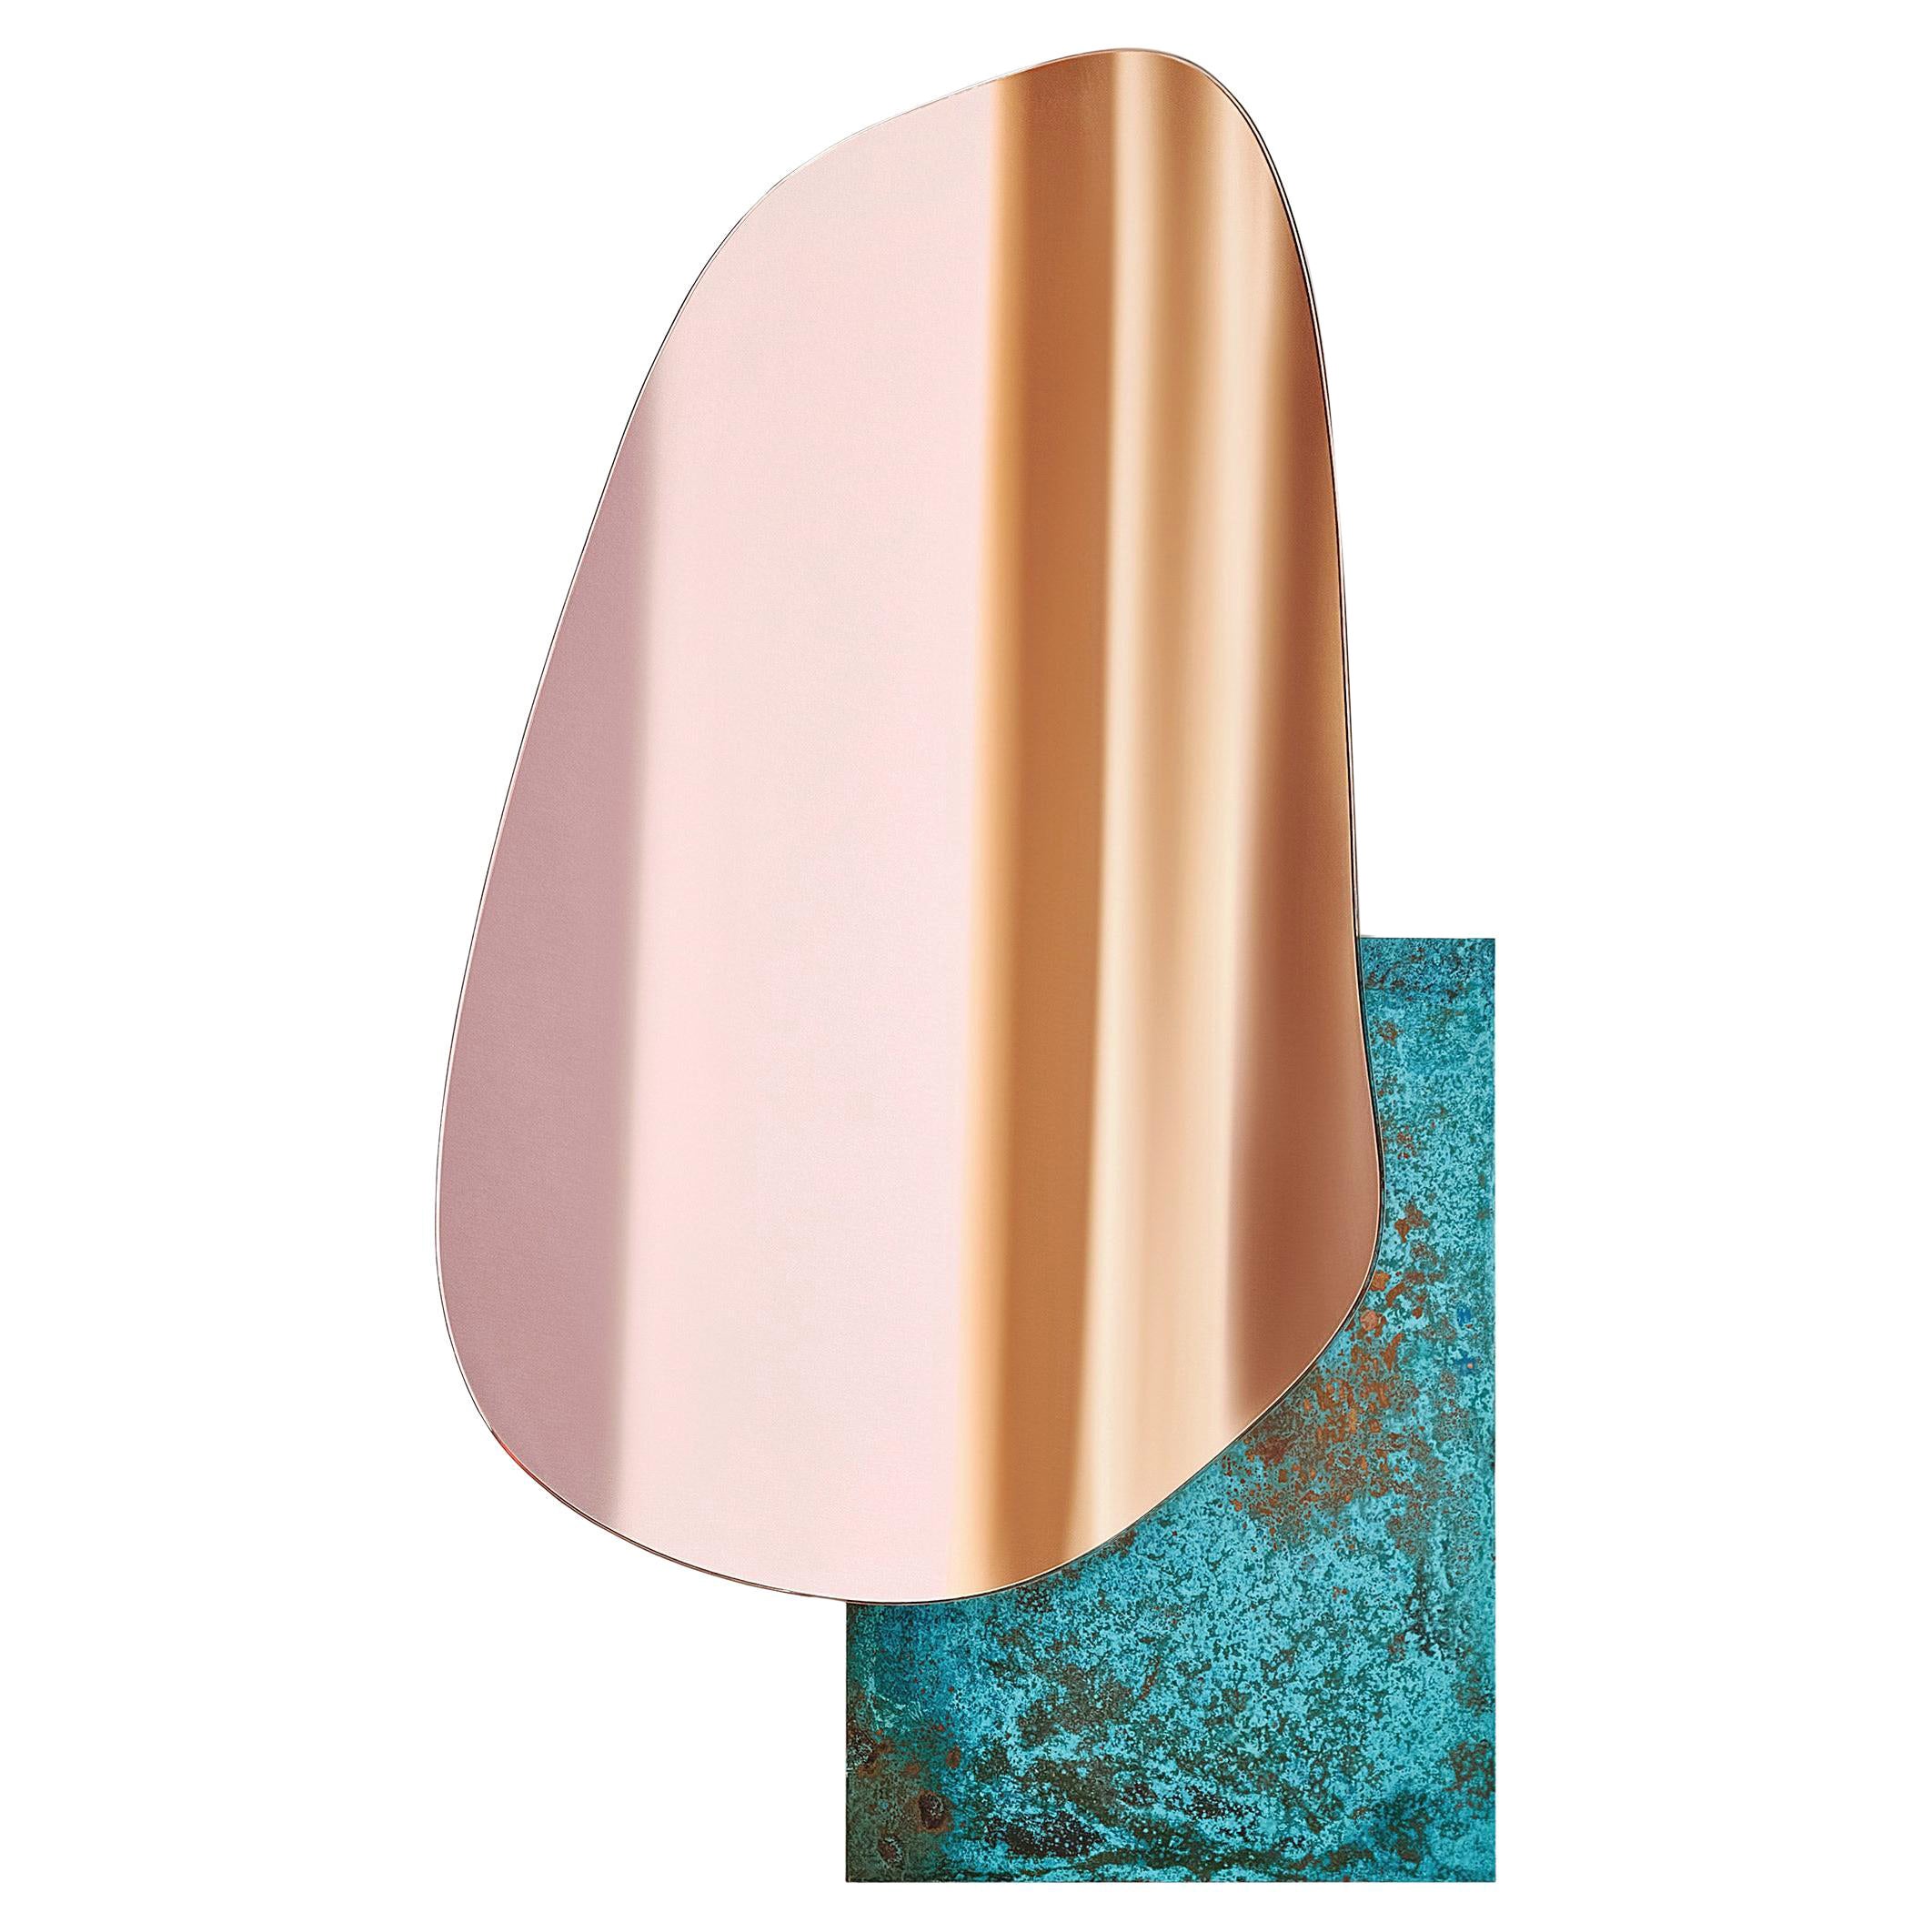 Contemporary Wall Mirror 'Lake 3' by Noom, Copper Tint with Oxidized Base